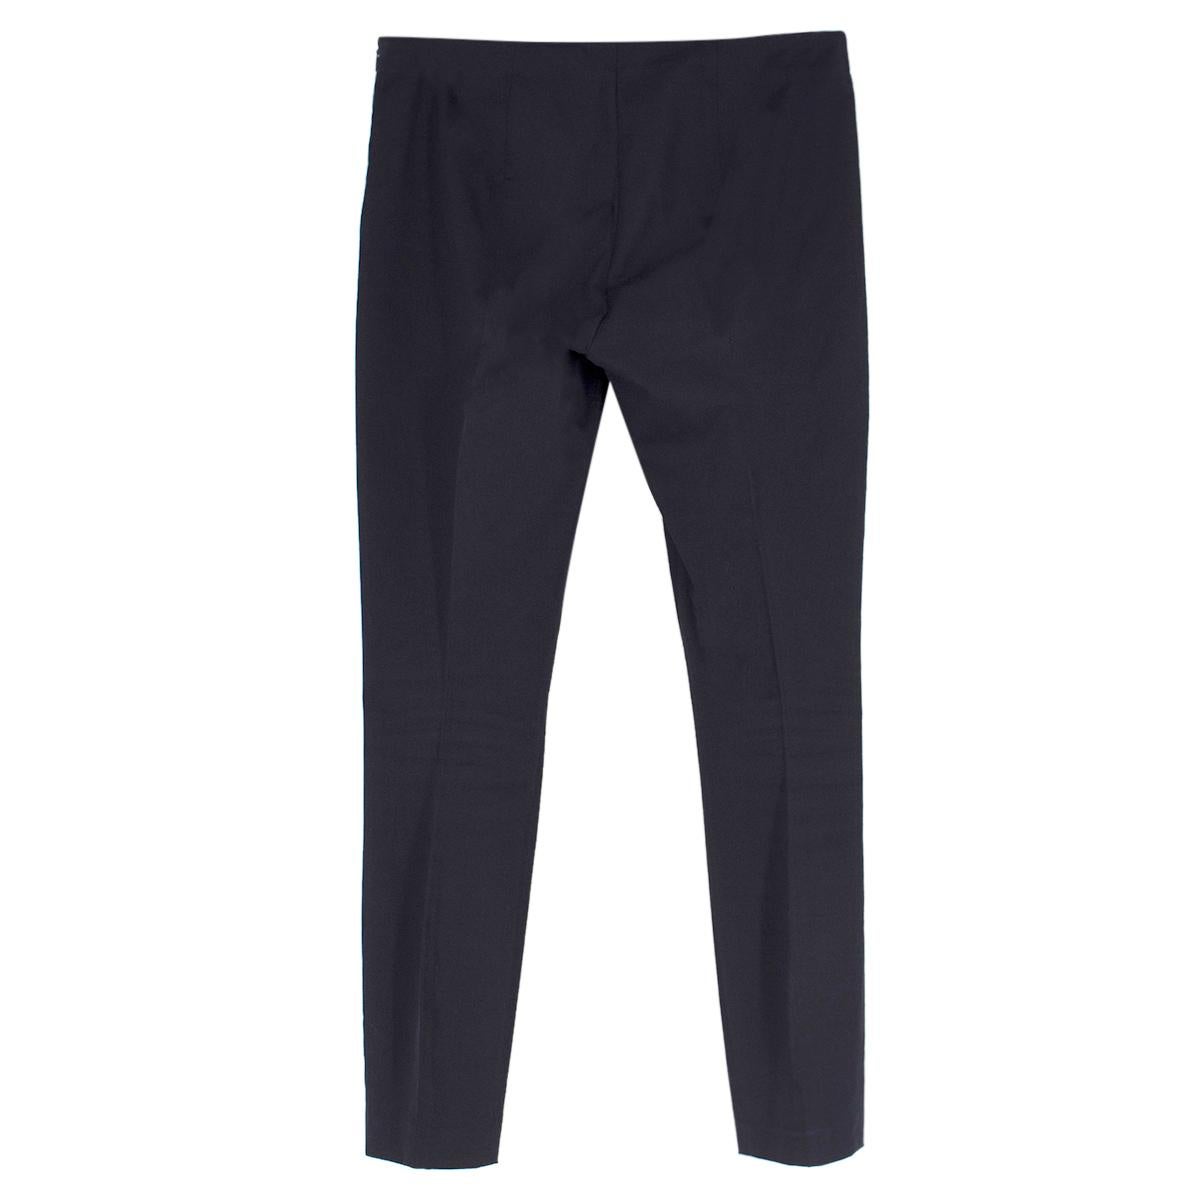 The Row Black Cigarette Trousers

-Black skinny cigarette trousers
-Classic central seam 
-Side zip closure

Please note, these items are pre-owned and may show signs of being stored even when unworn and unused. This is reflected within the